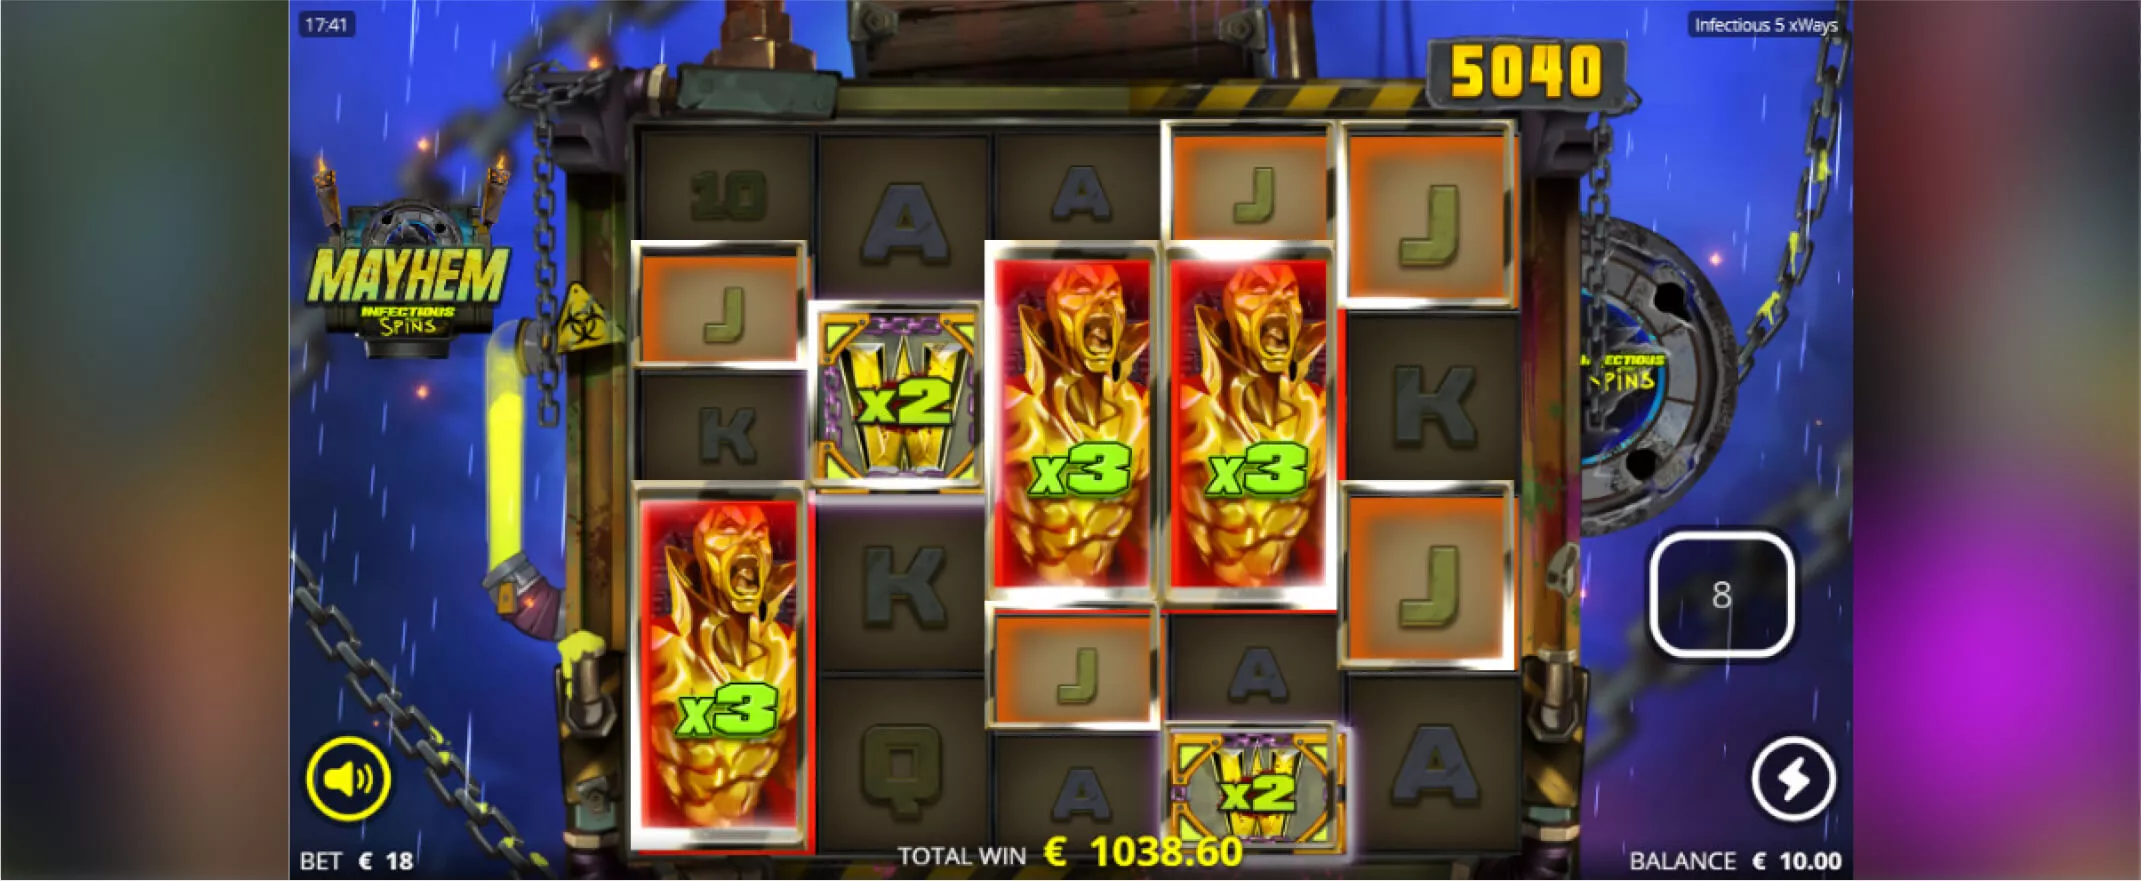 Infectious 5 xWays slot screenshot of the reels